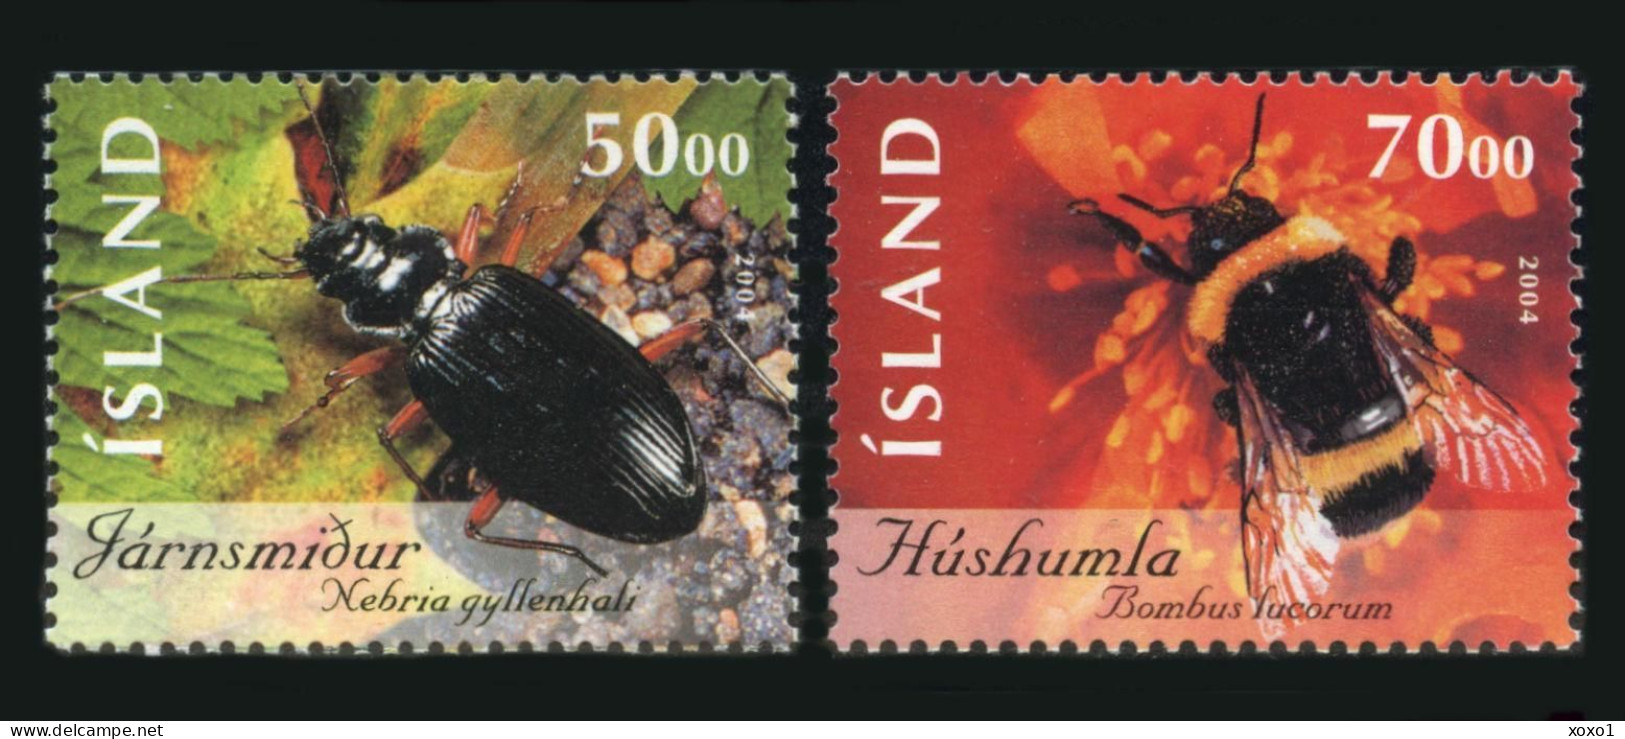 Iceland 2004 MiNr. 1075 - 1076 Island Insects And Spiders  # 1     2v  MNH** 3.50 € - Ongebruikt